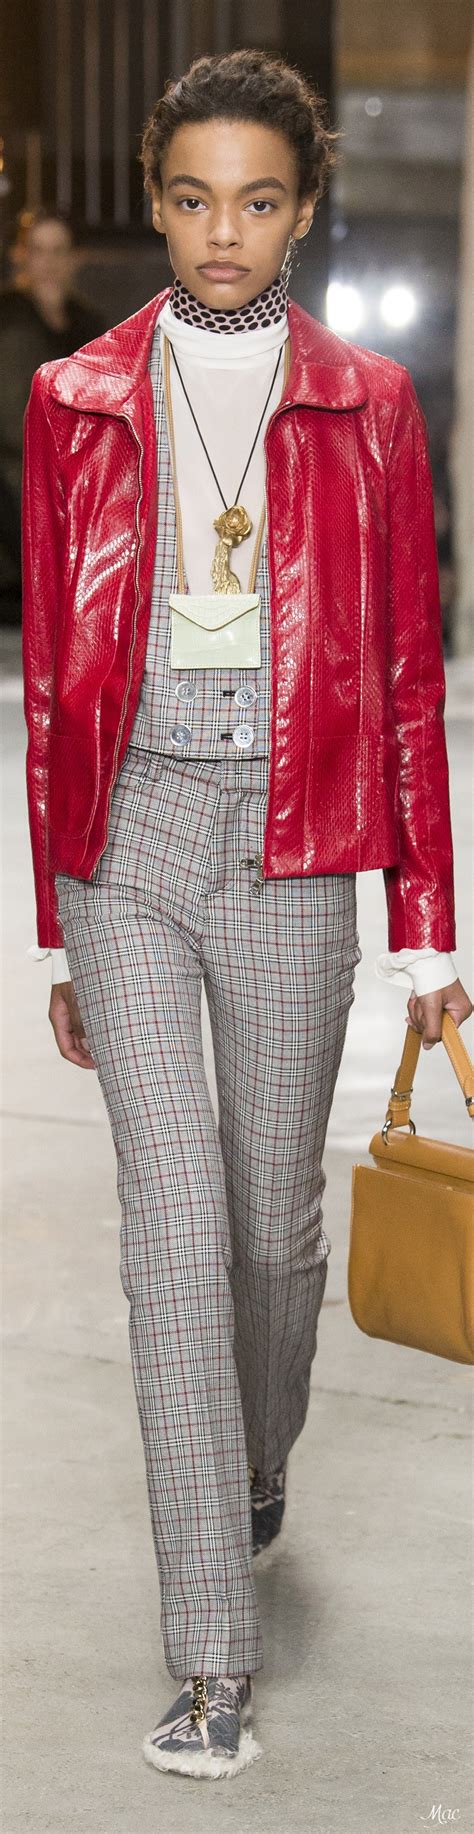 fall 2018 rtw gimabattista valli cool outfits fashion outfits